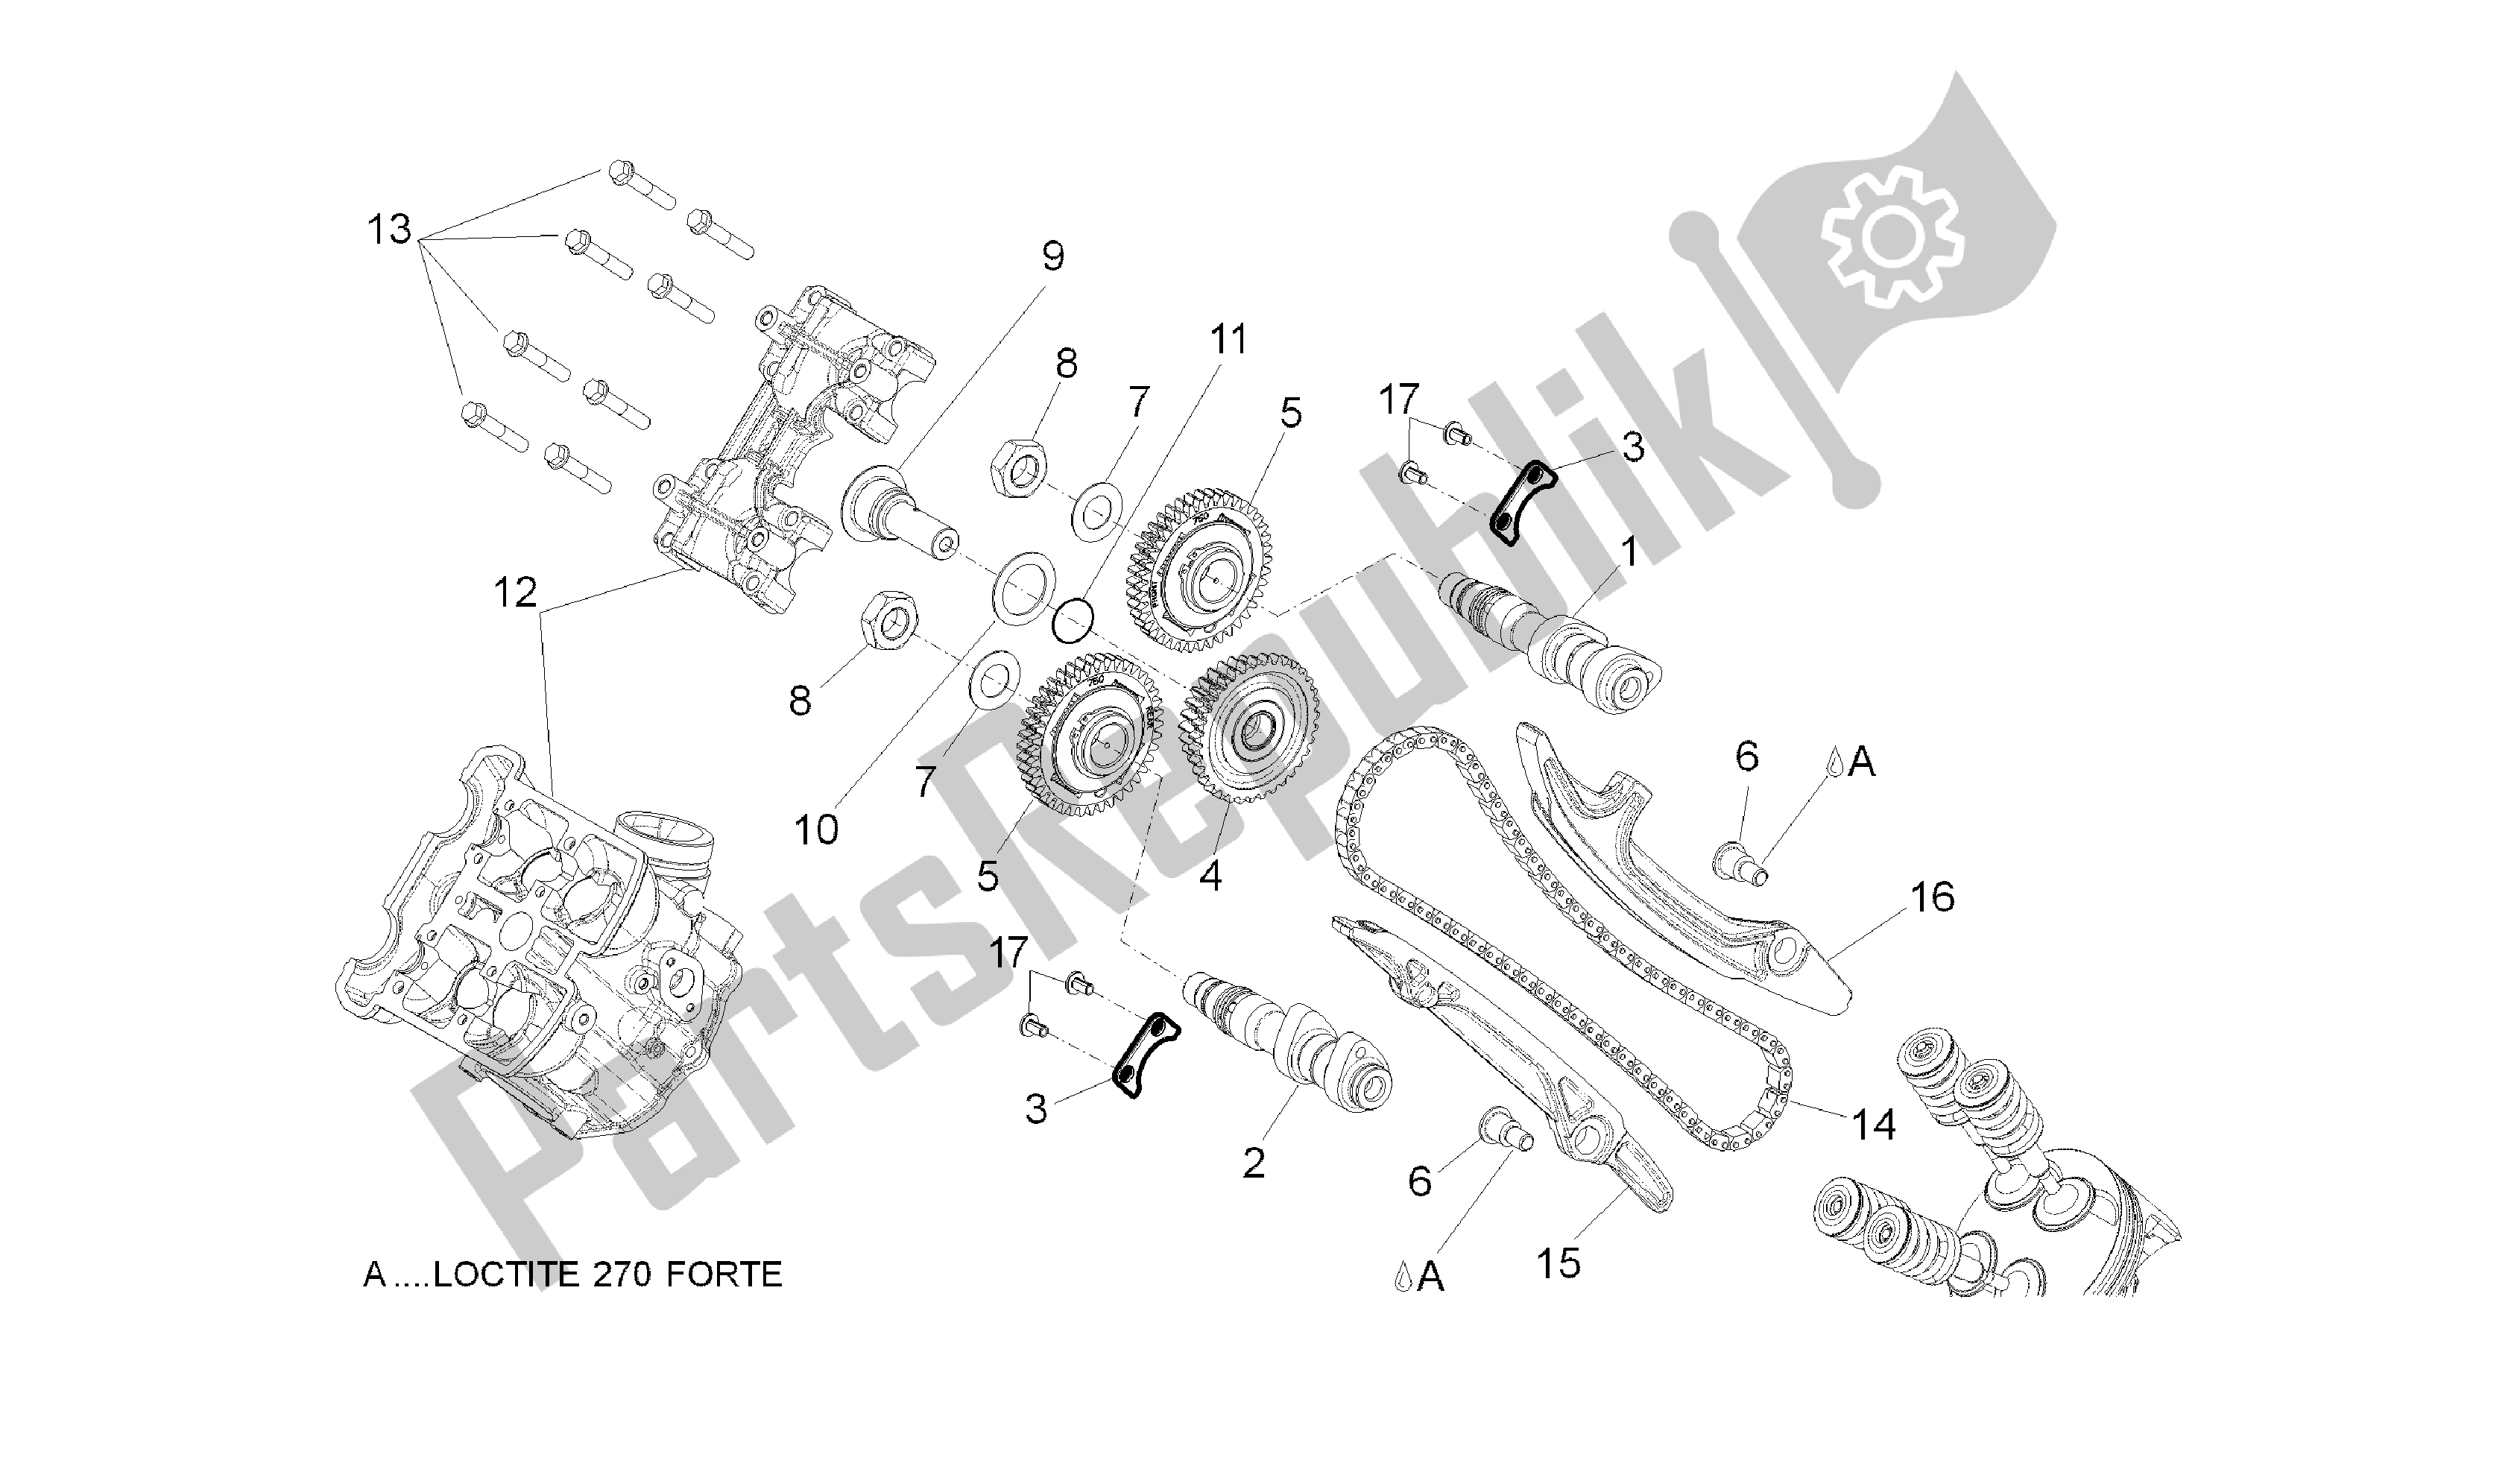 All parts for the Front Cylinder Timing System of the Aprilia Shiver 750 2007 - 2009